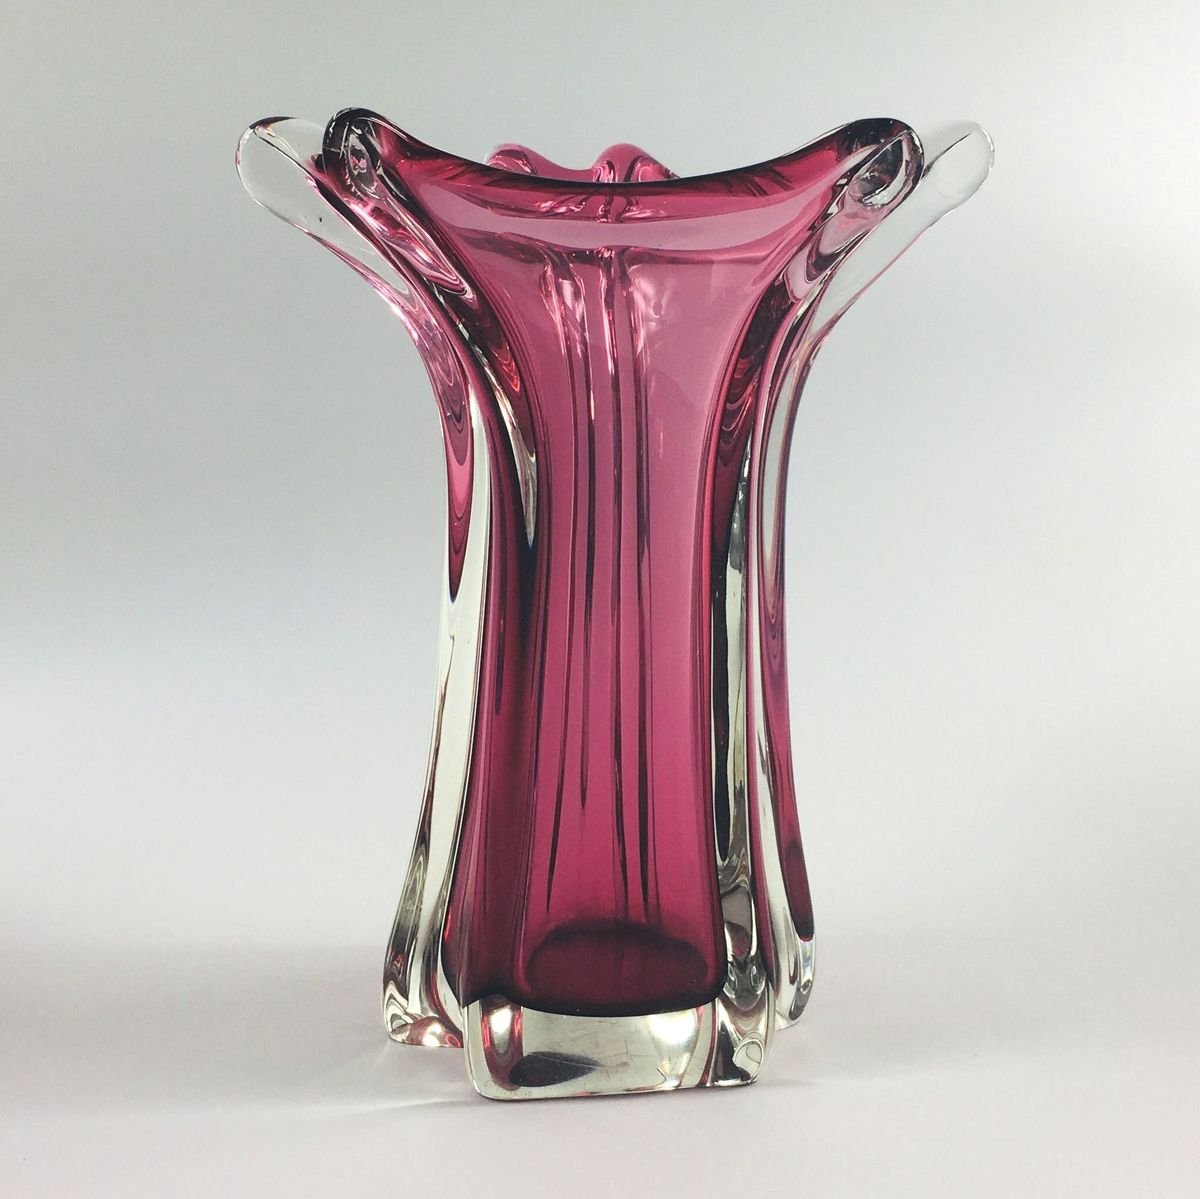 Large Mid Century Murano Glass Vase From Fratelli Toso 1950s For Sale At Pamono